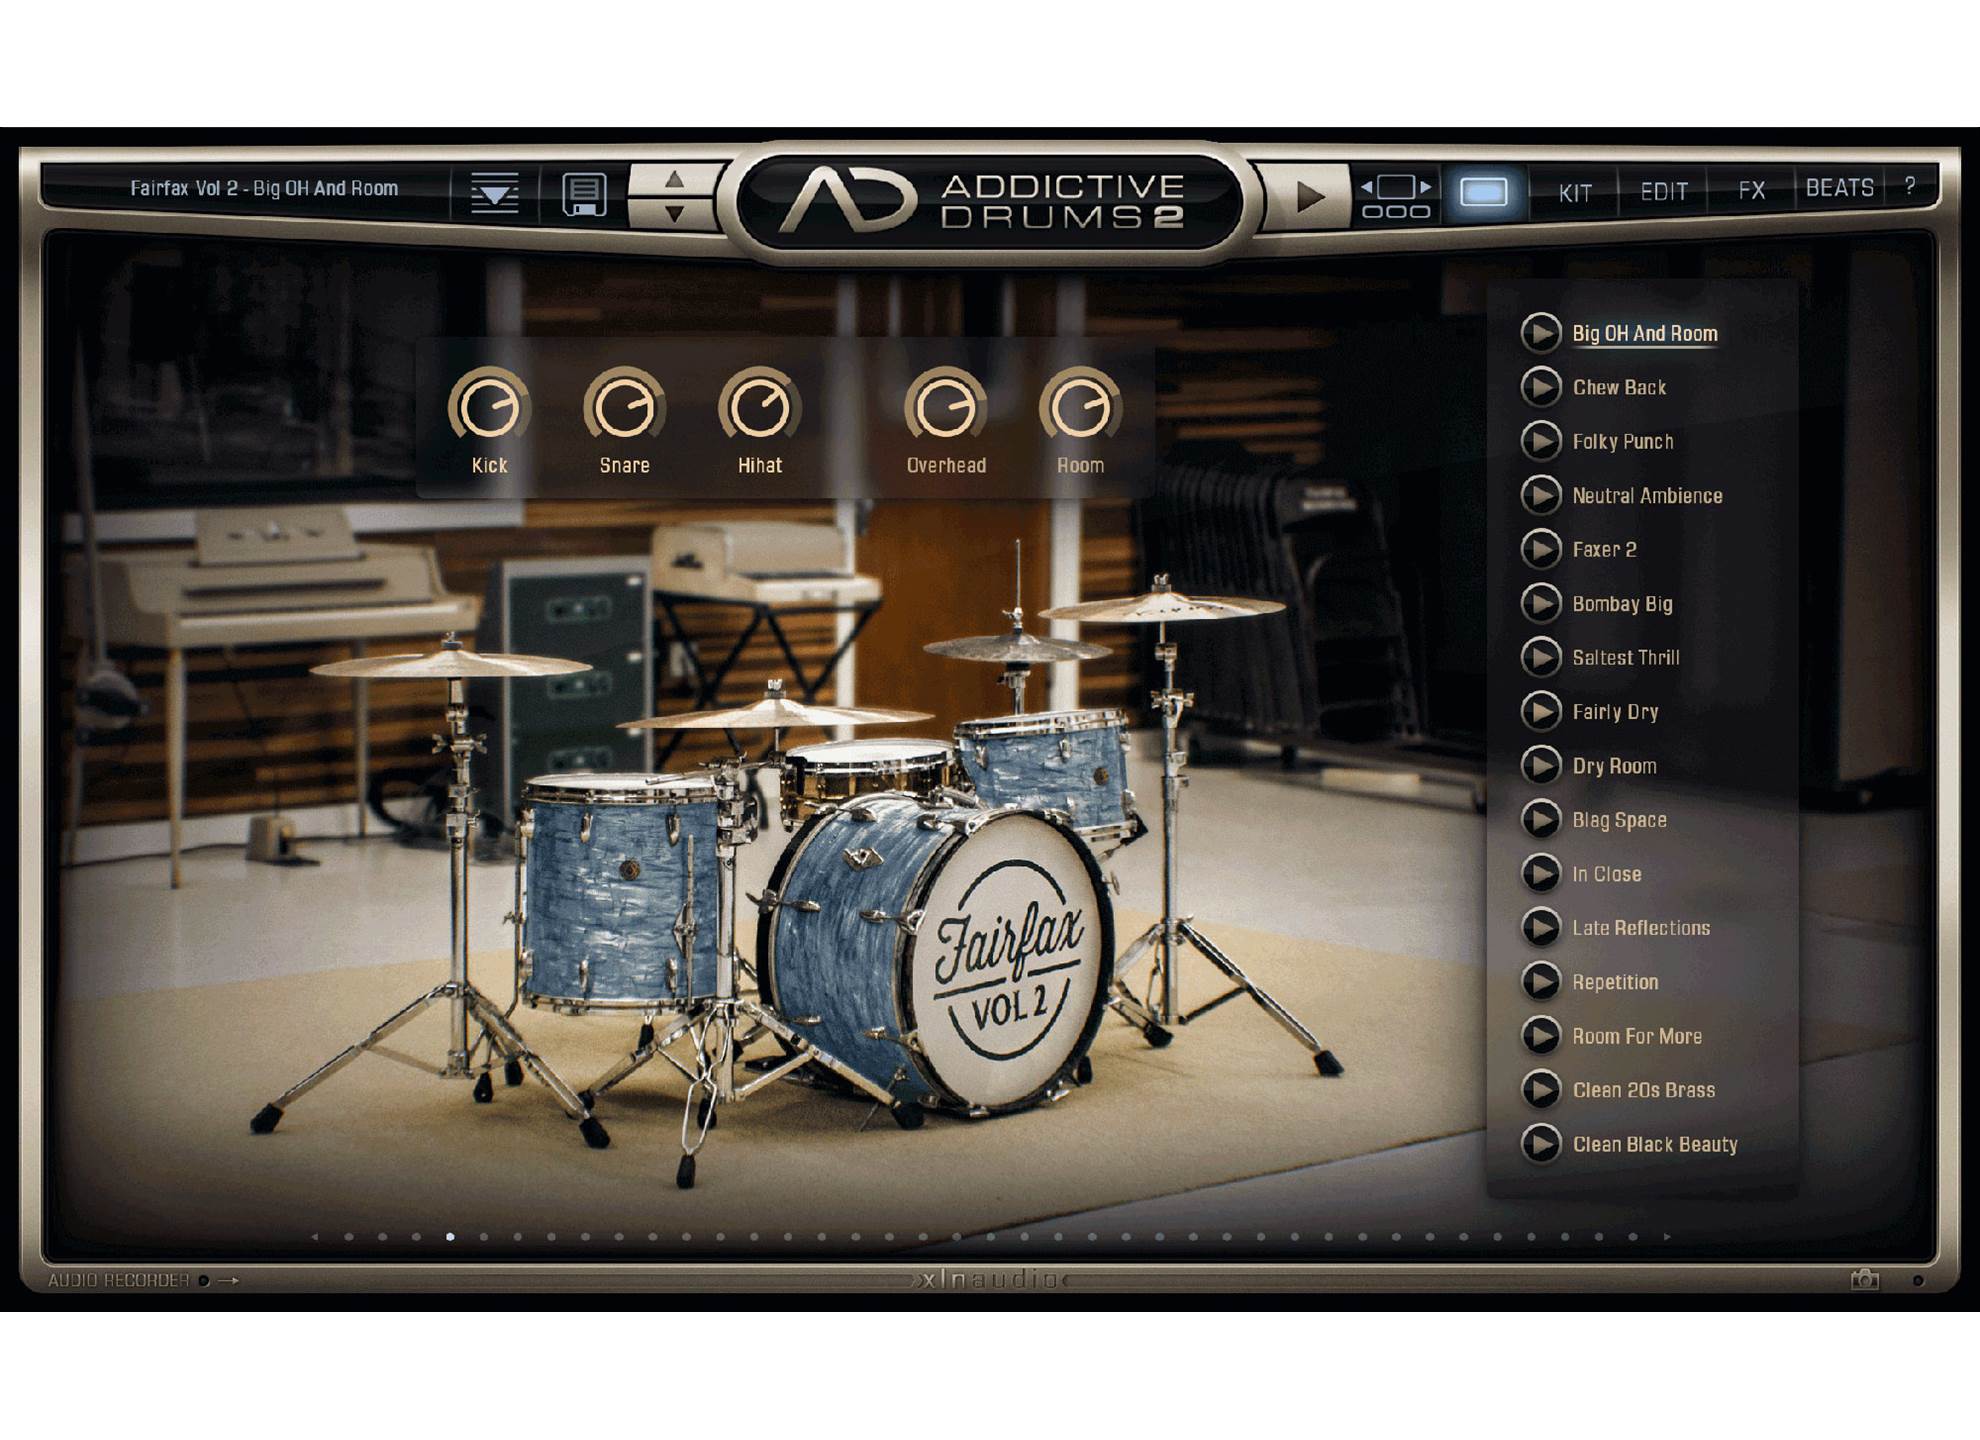 Addictive Drums 2: Rock Collection